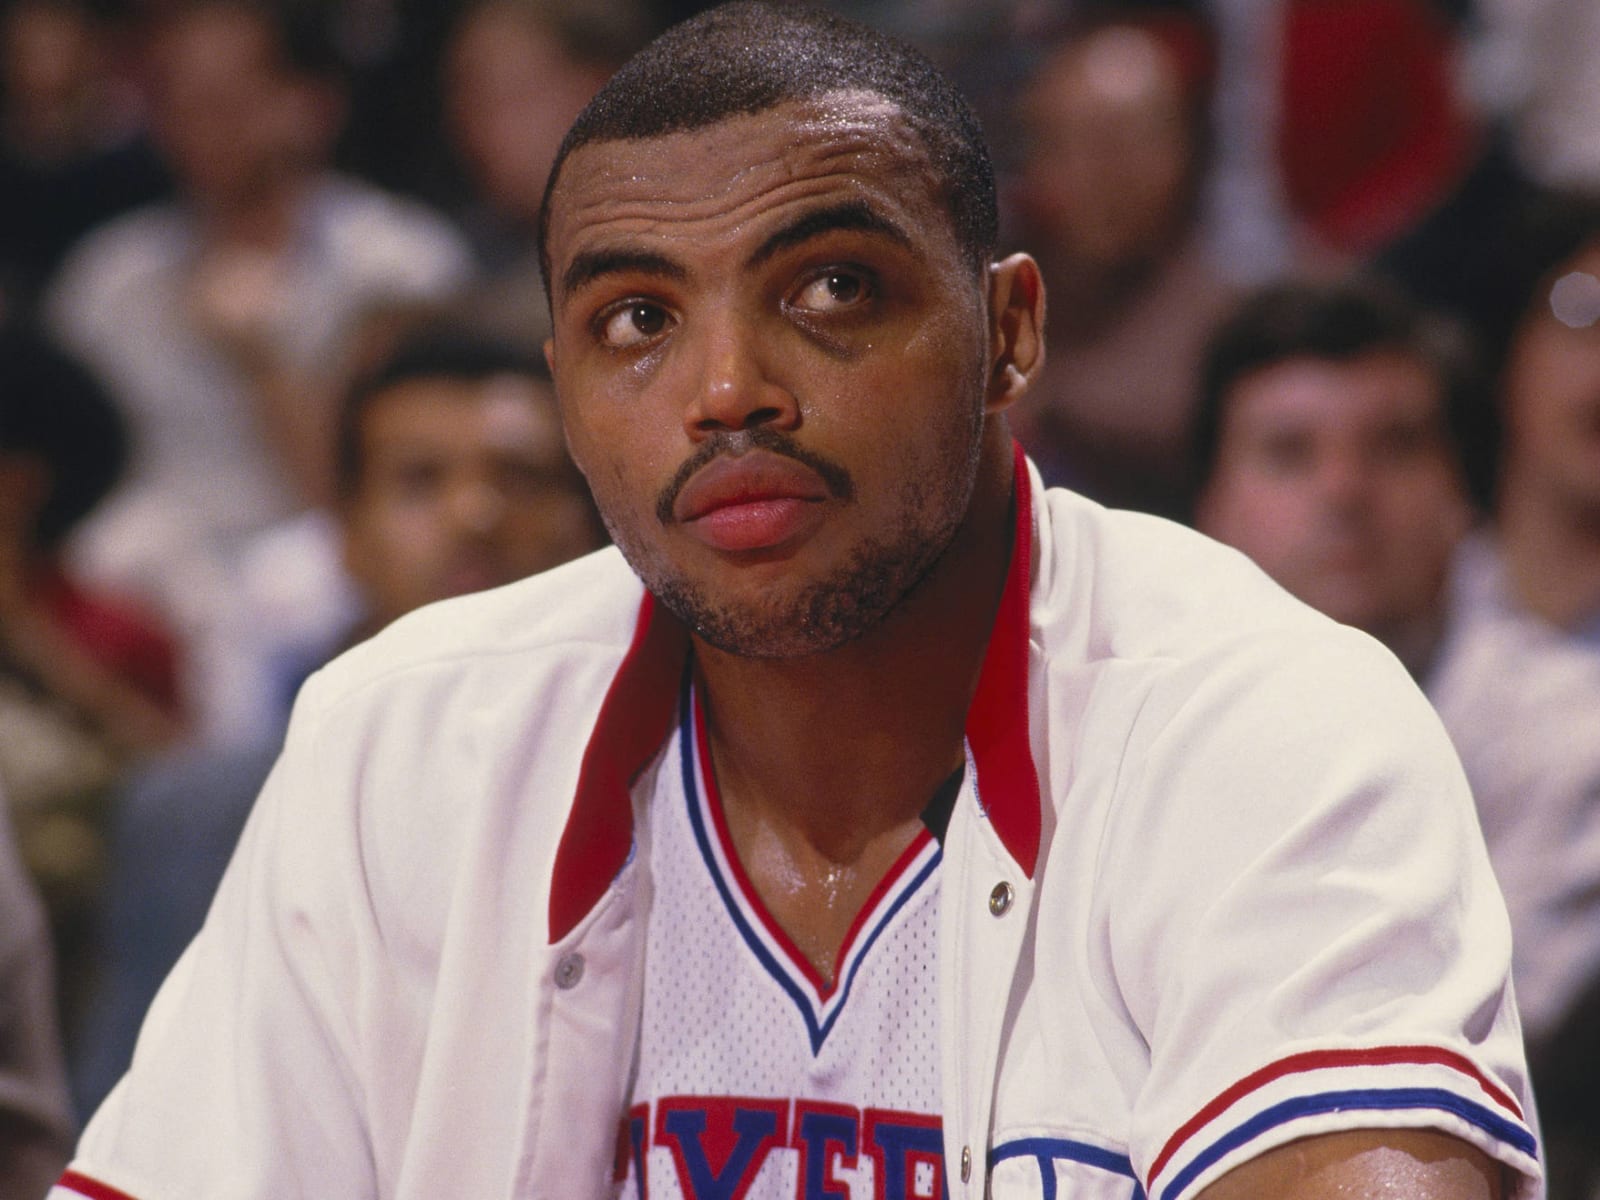 Charles Barkley-era Suns jerseys to reportedly be used by team